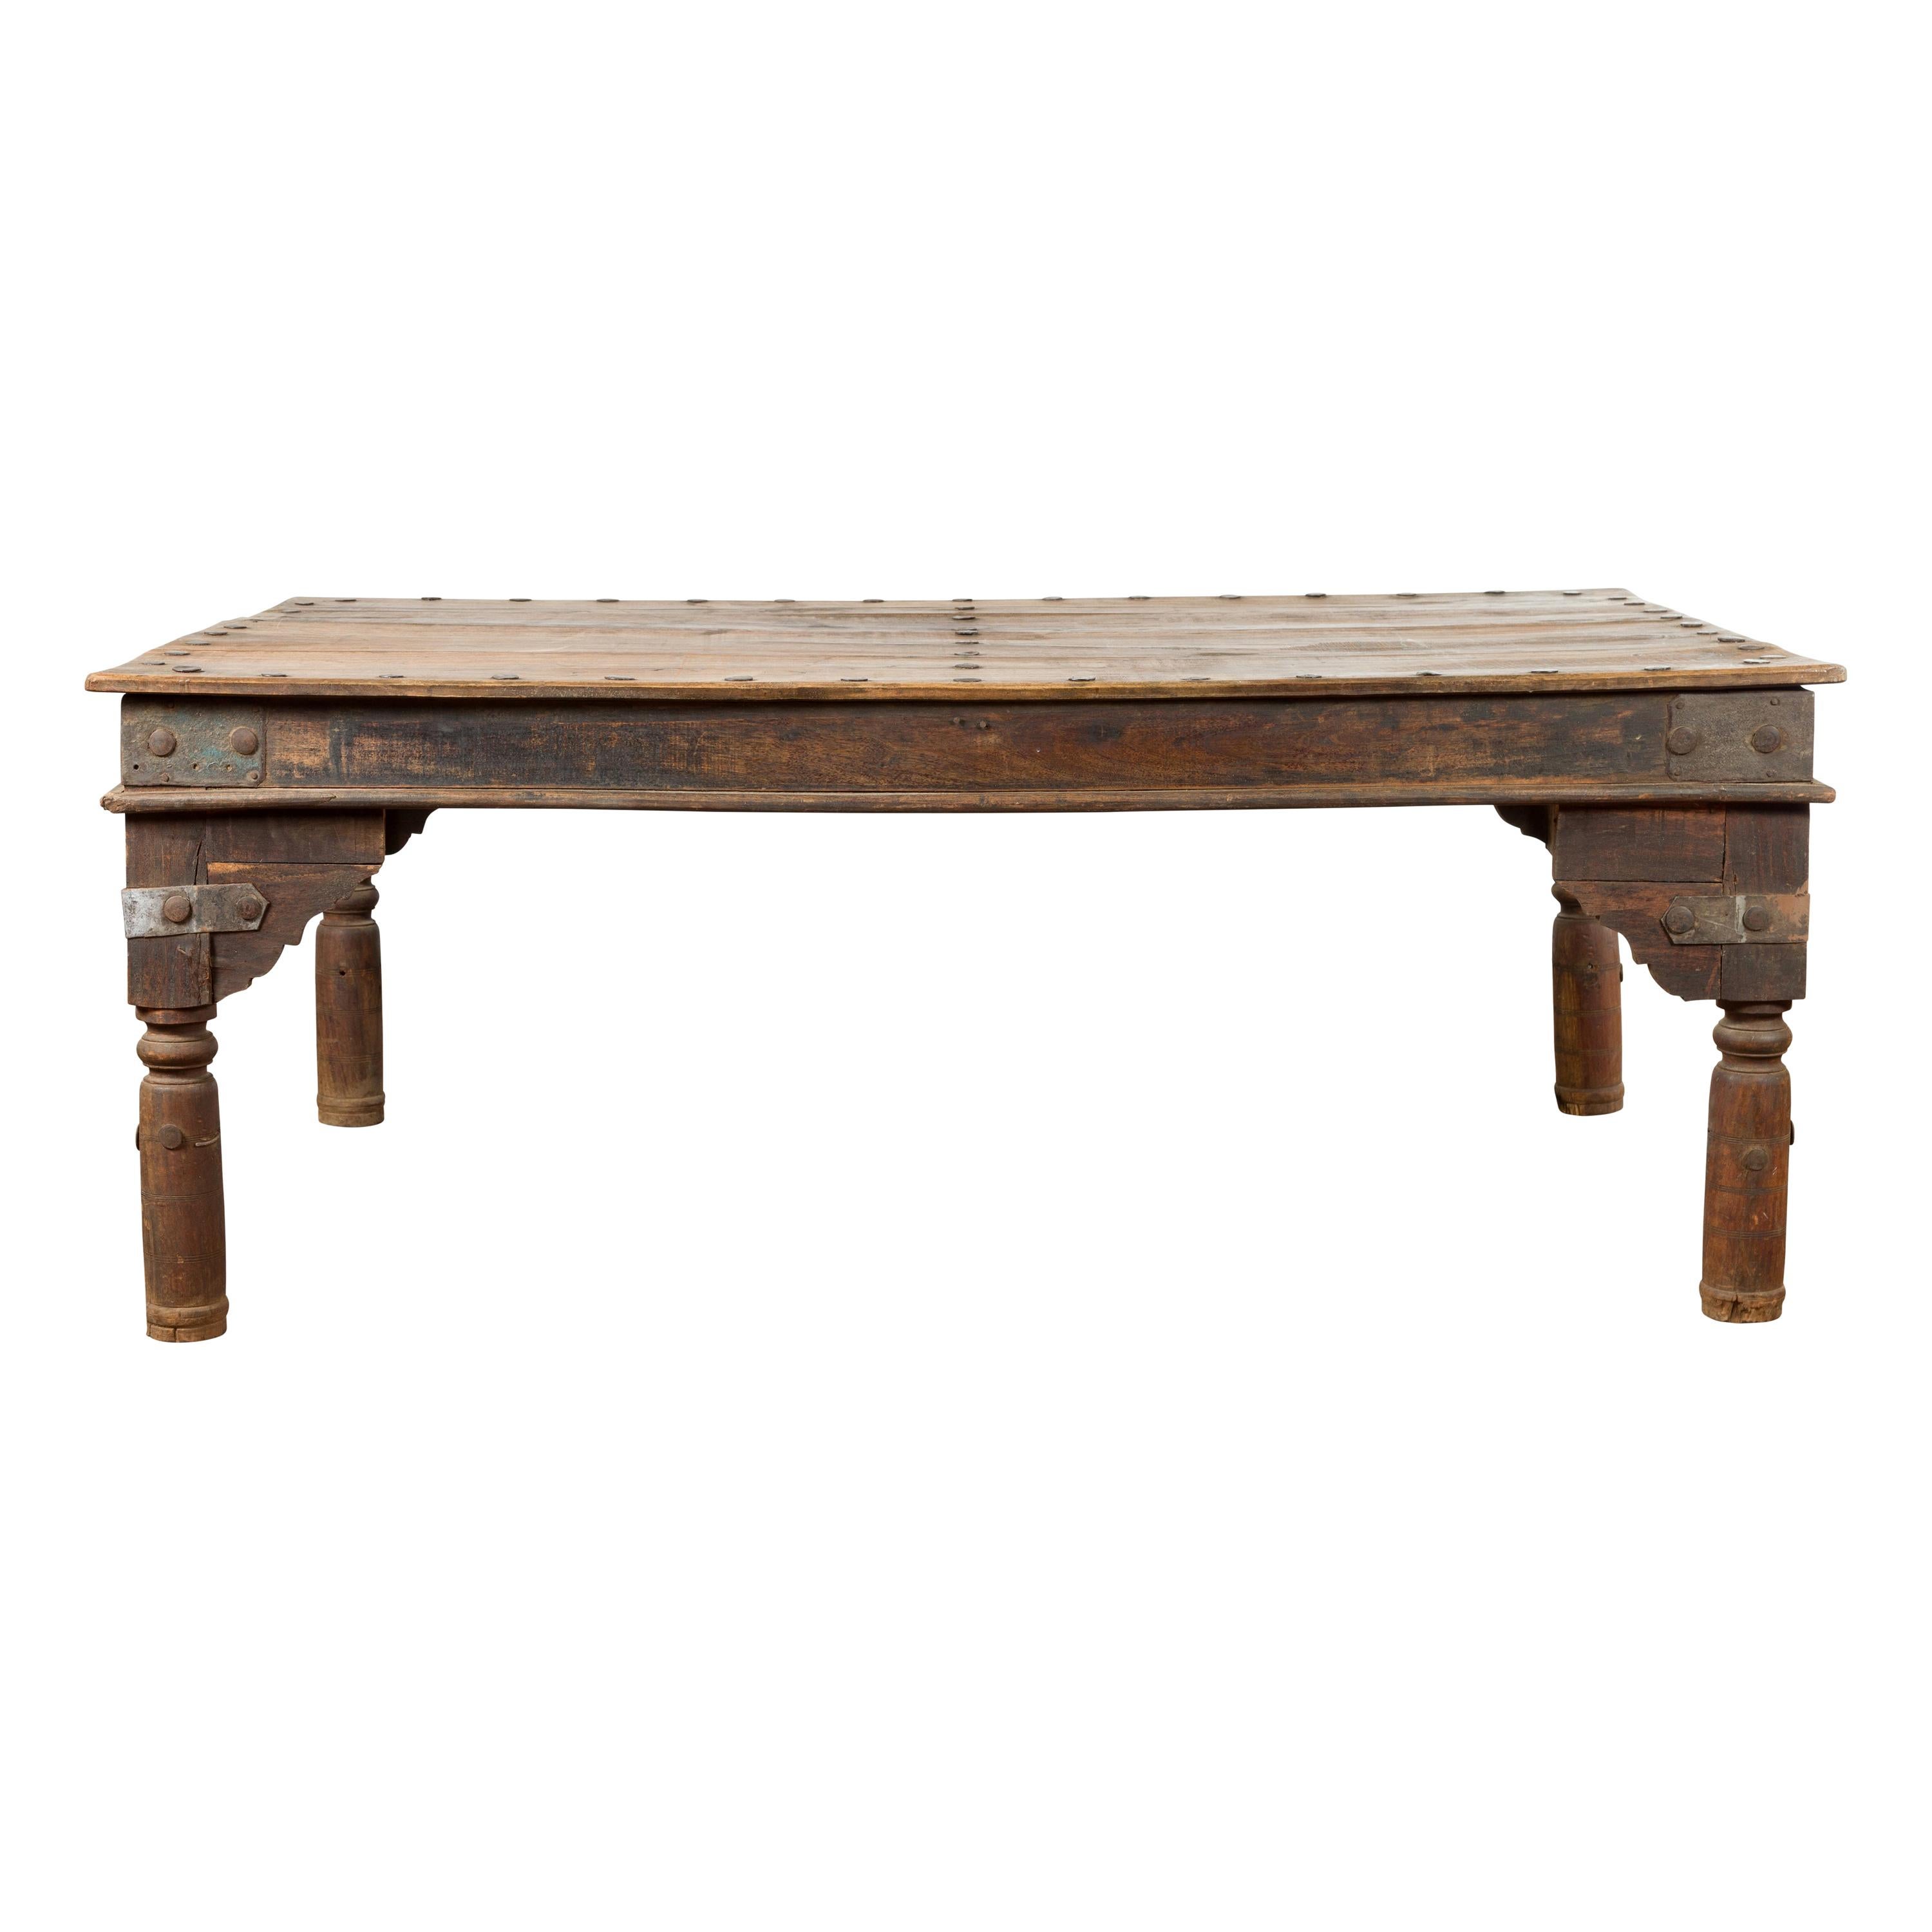 Indian Wood Dining Table with Distressed Patina, Iron Details and Baluster Legs For Sale